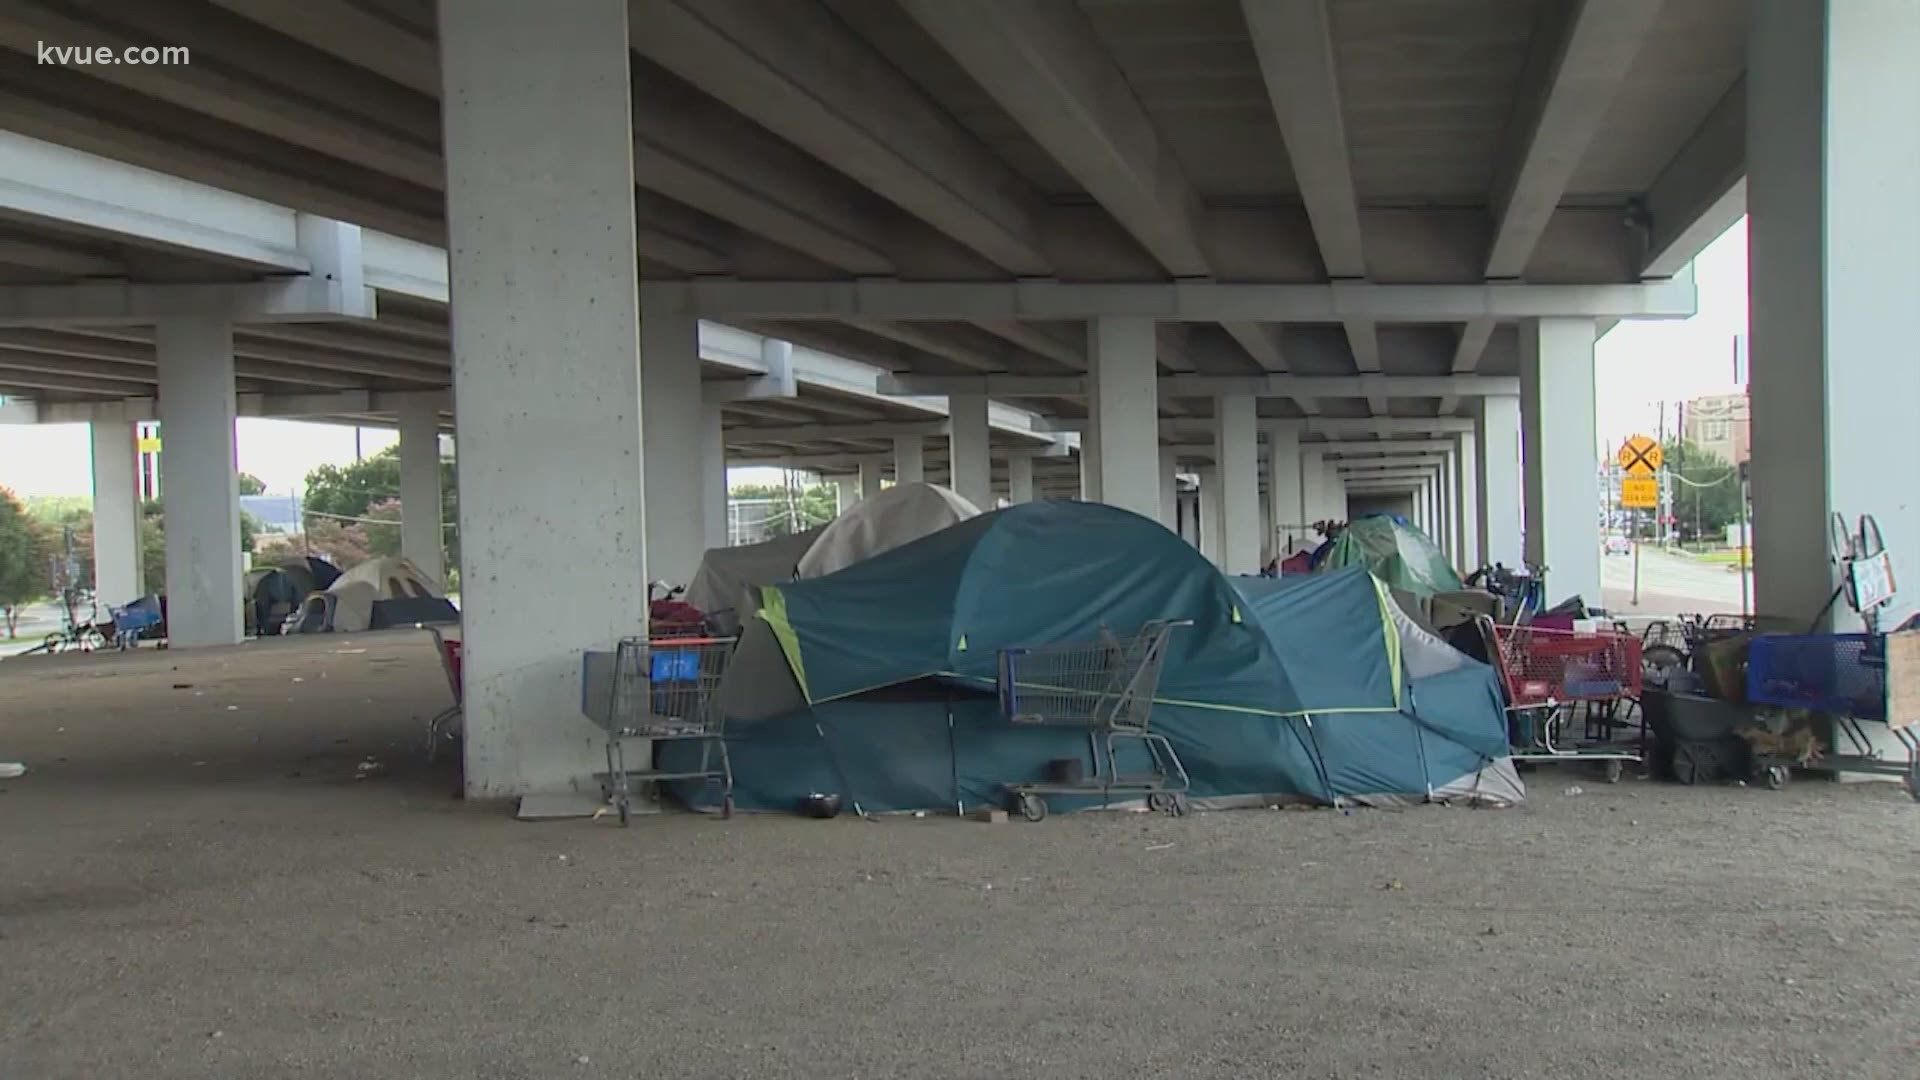 The City of Austin could spend $16 million to buy two more hotels to be used to house homeless individuals.